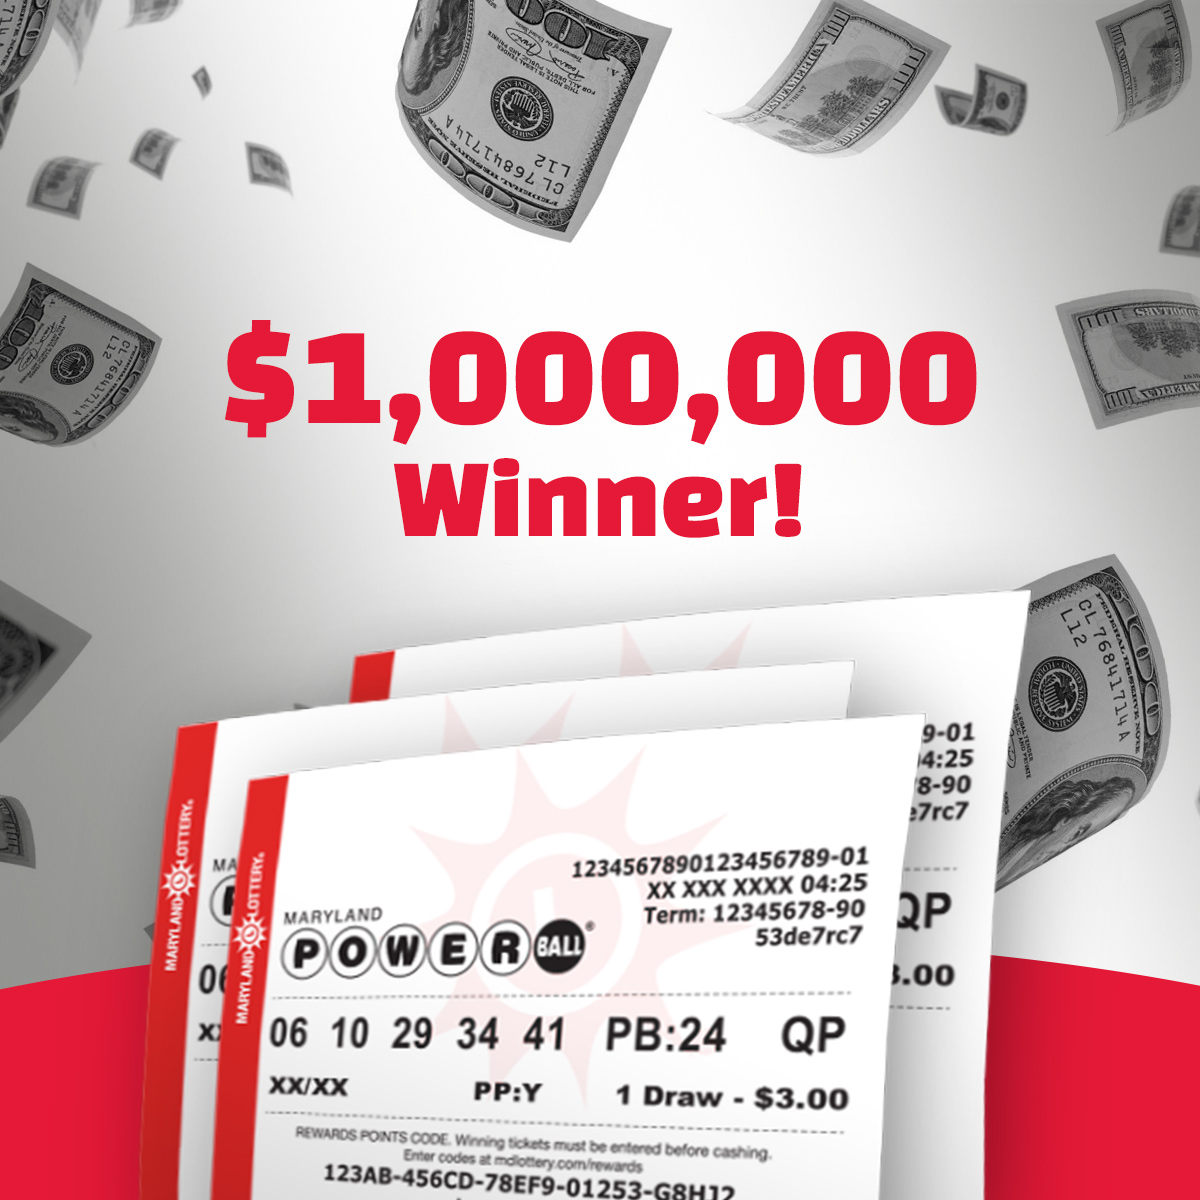 Congratulations to the newest Maryland millionaire! A $1 million winning Powerball ticket was sold in Takoma Park. Read more: https://t.co/P4GFDMUJr1 https://t.co/j0tdAMWEU5